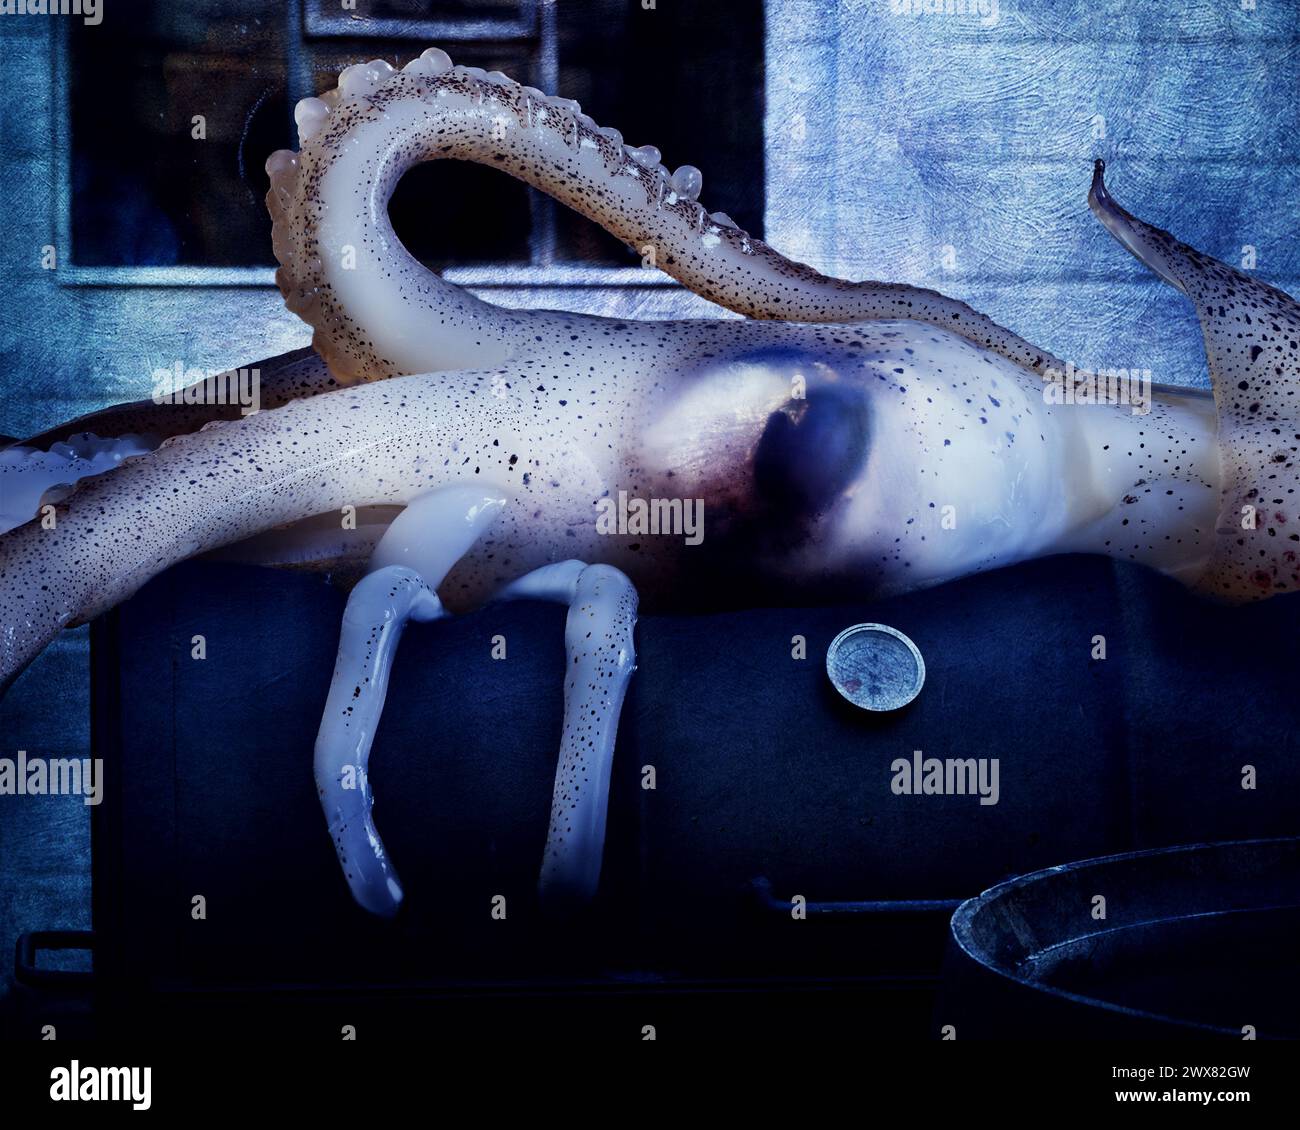 the calamari is revolting! A composite photograph featuring an oversized squid resting on a barbecue in a garden. Stock Photo